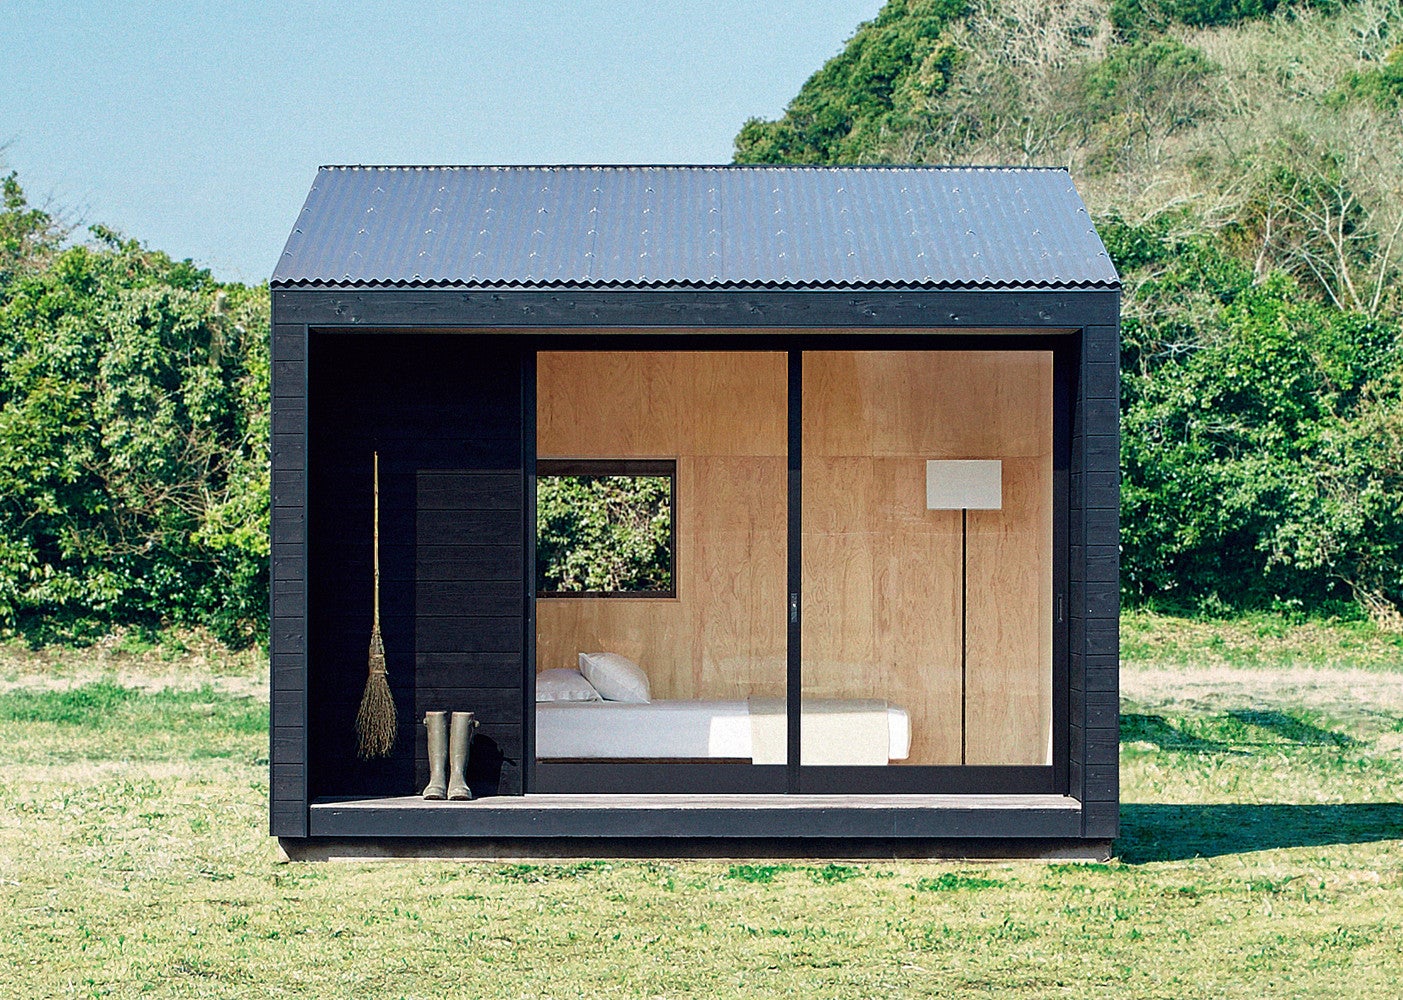 New MUJI Tiny Home Is the Ultimate Minimalist Space